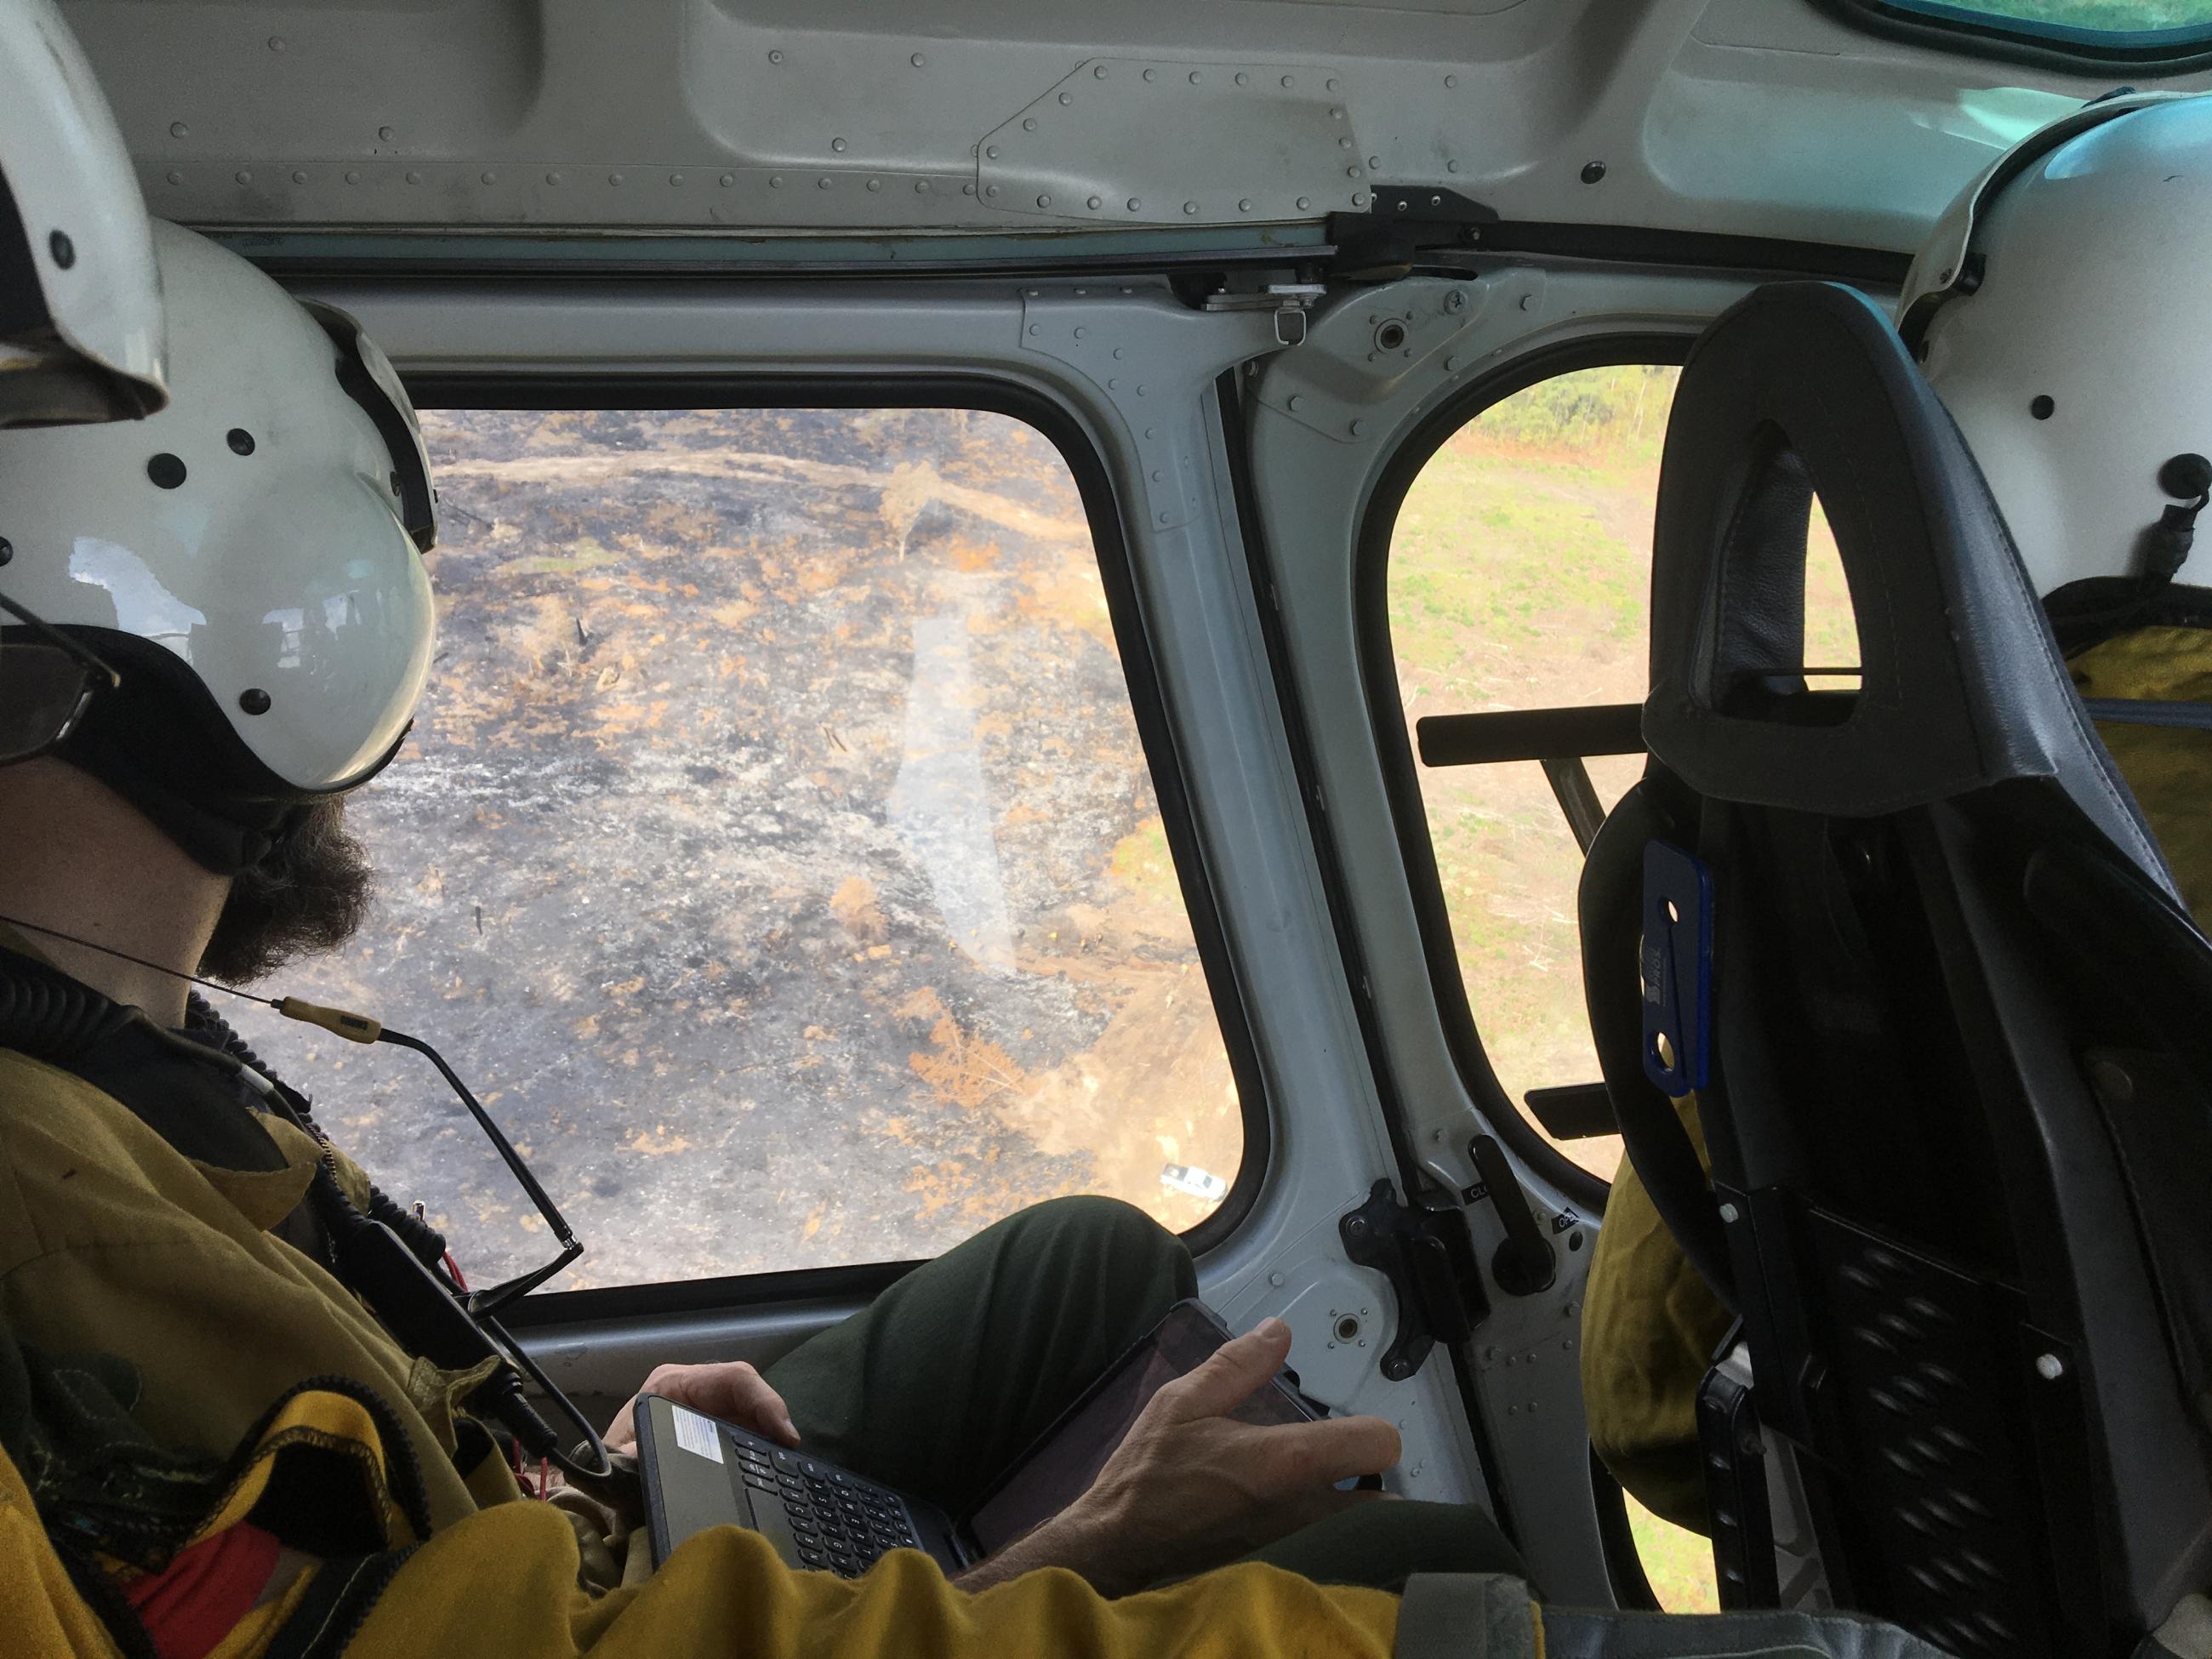 A firefighter in a helicopter looks out over burned area.